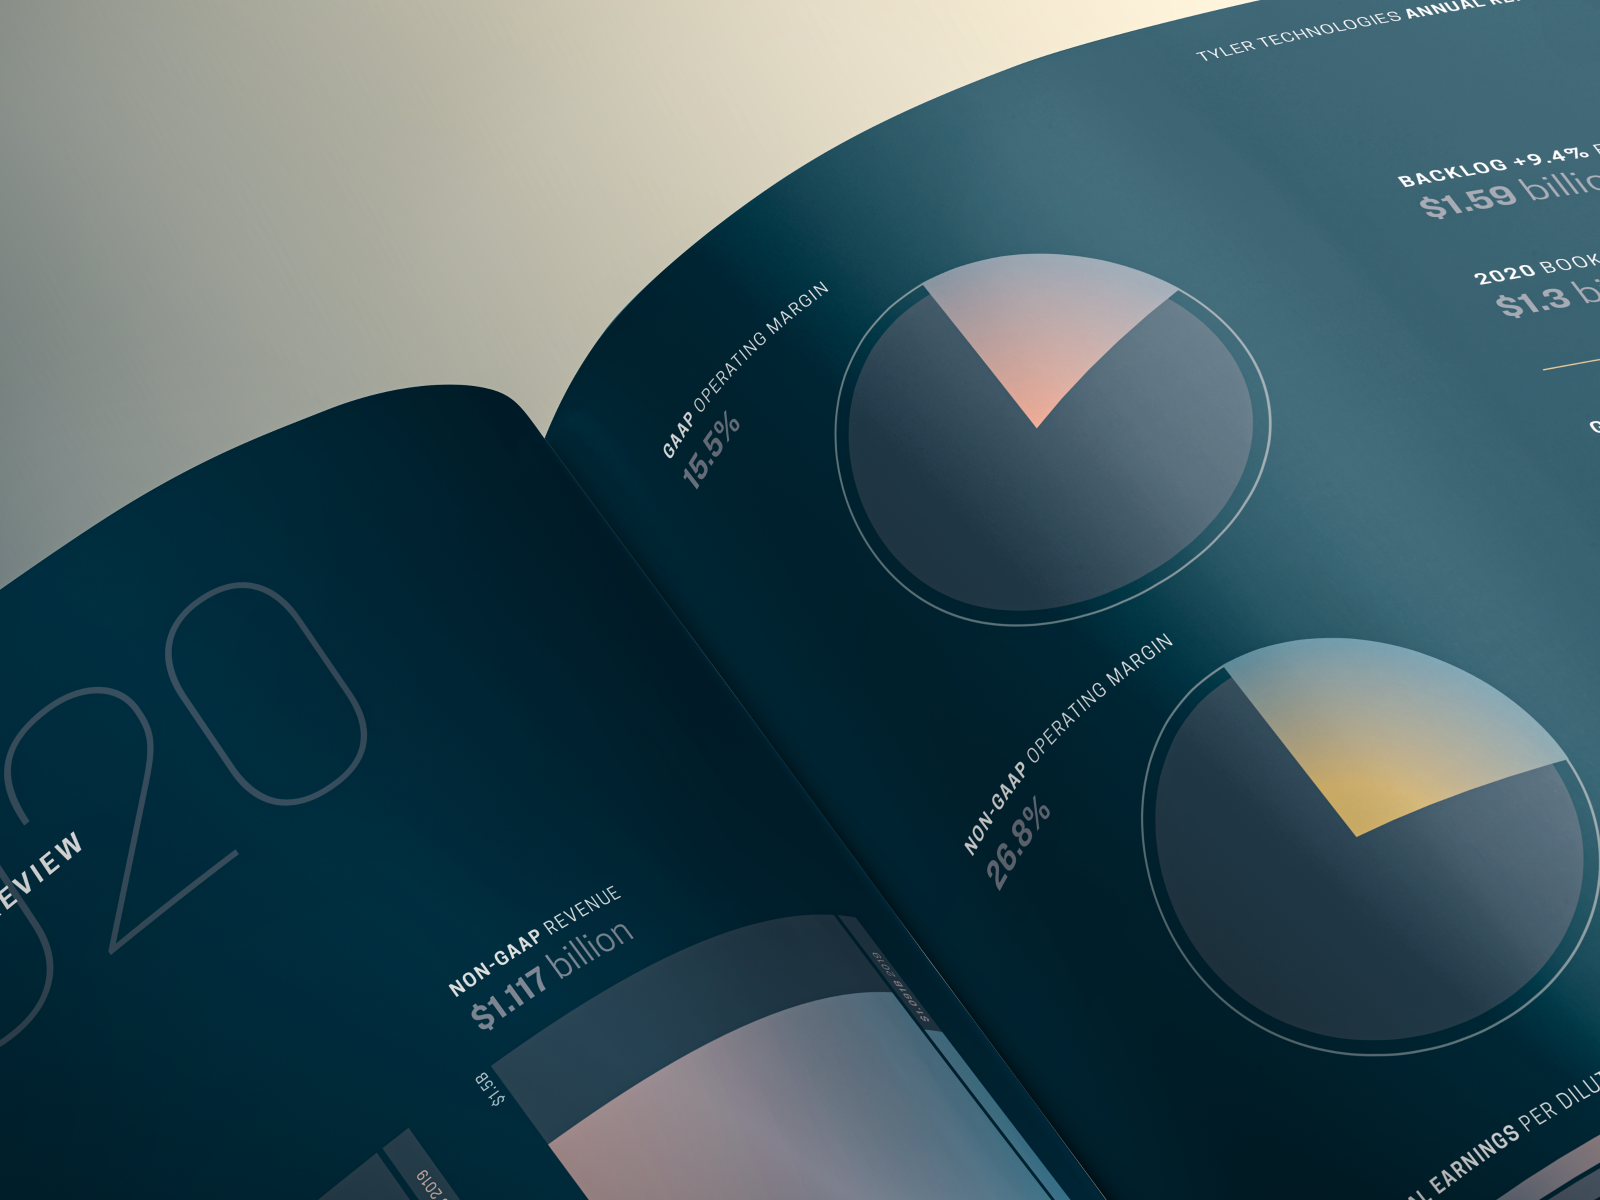 2021 Tyler Technologies Annual Report by Spire for Spire Agency on Dribbble